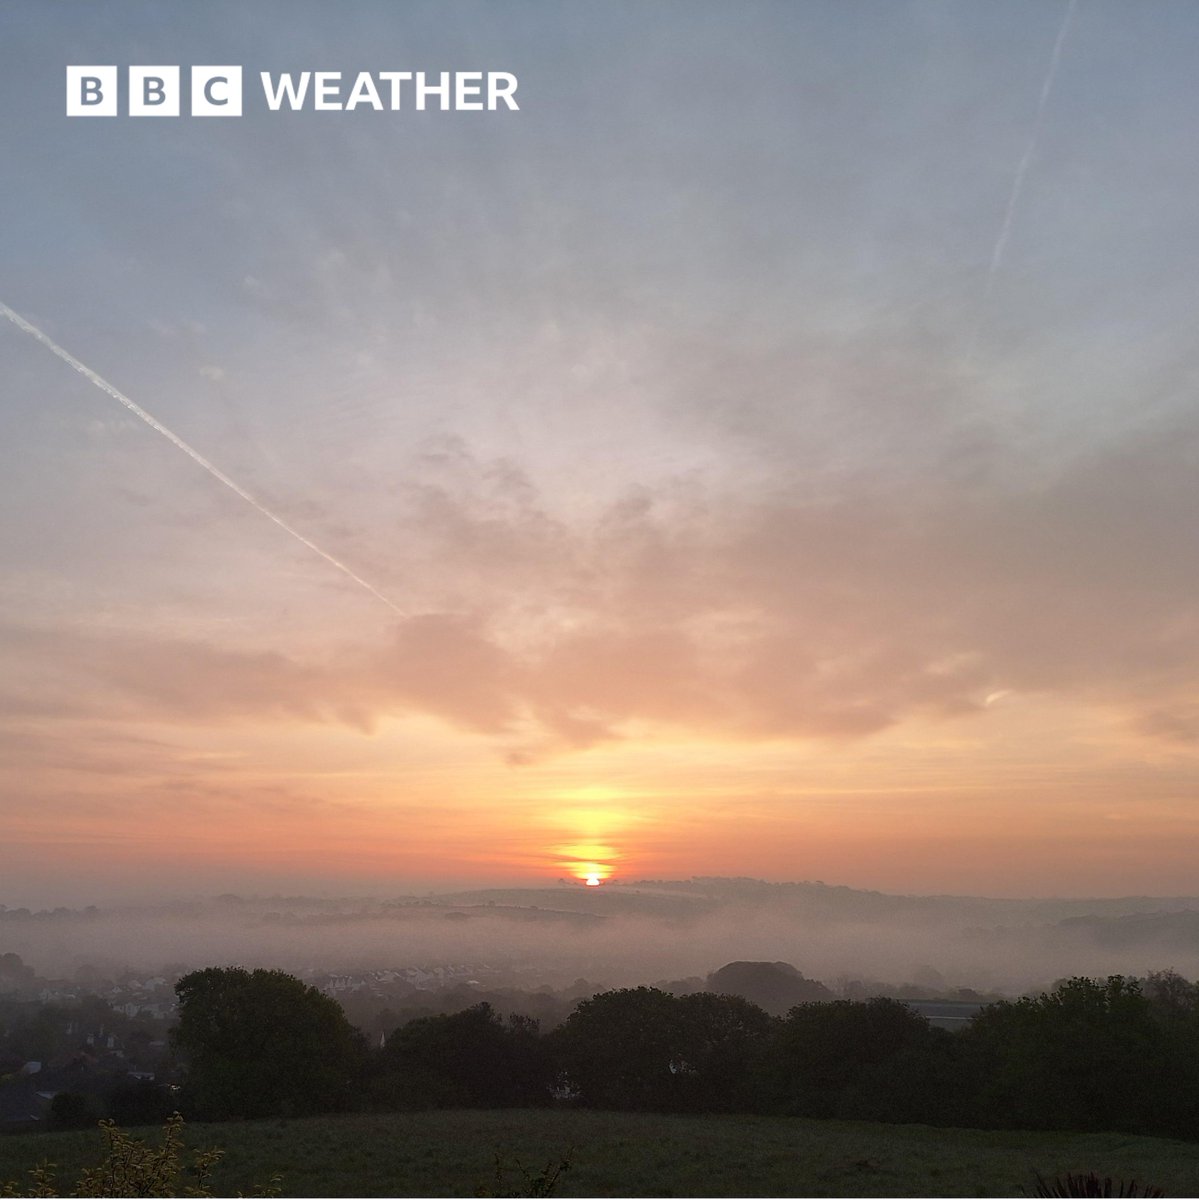 Good morning
...welcome to Thursday!

Damp start for some in Scotland, but another dry day ahead for many.
bbc.co.uk/weather

📷Par, Cornwall by Par Bados